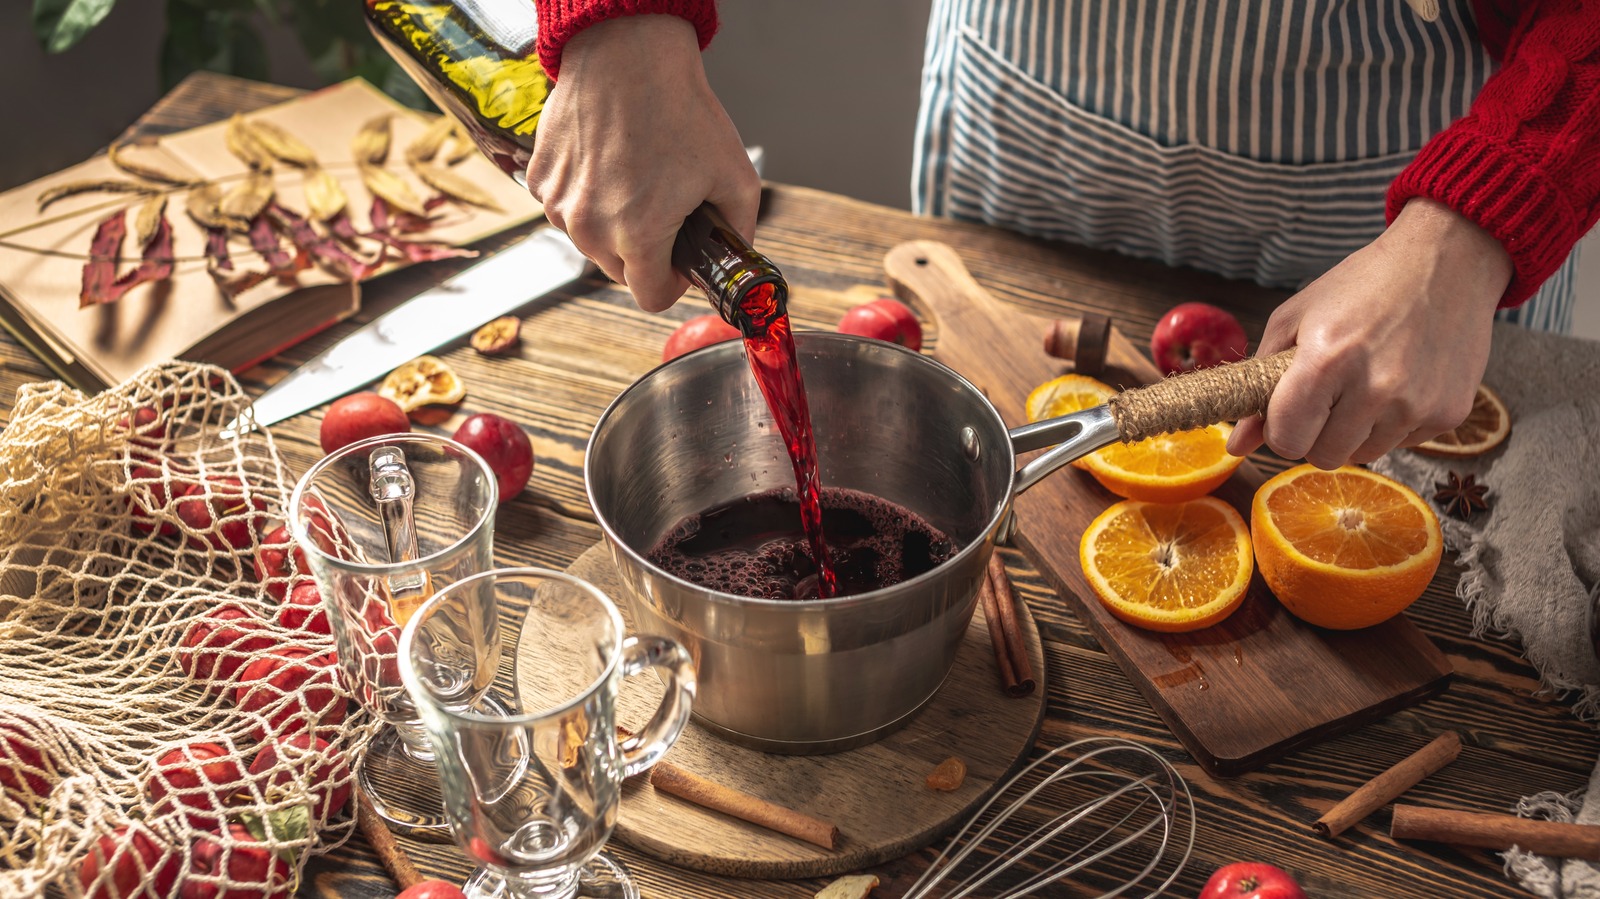 https://www.tastingtable.com/img/gallery/10-tips-to-serve-and-drink-mulled-wine-this-winter/l-intro-1703242750.jpg